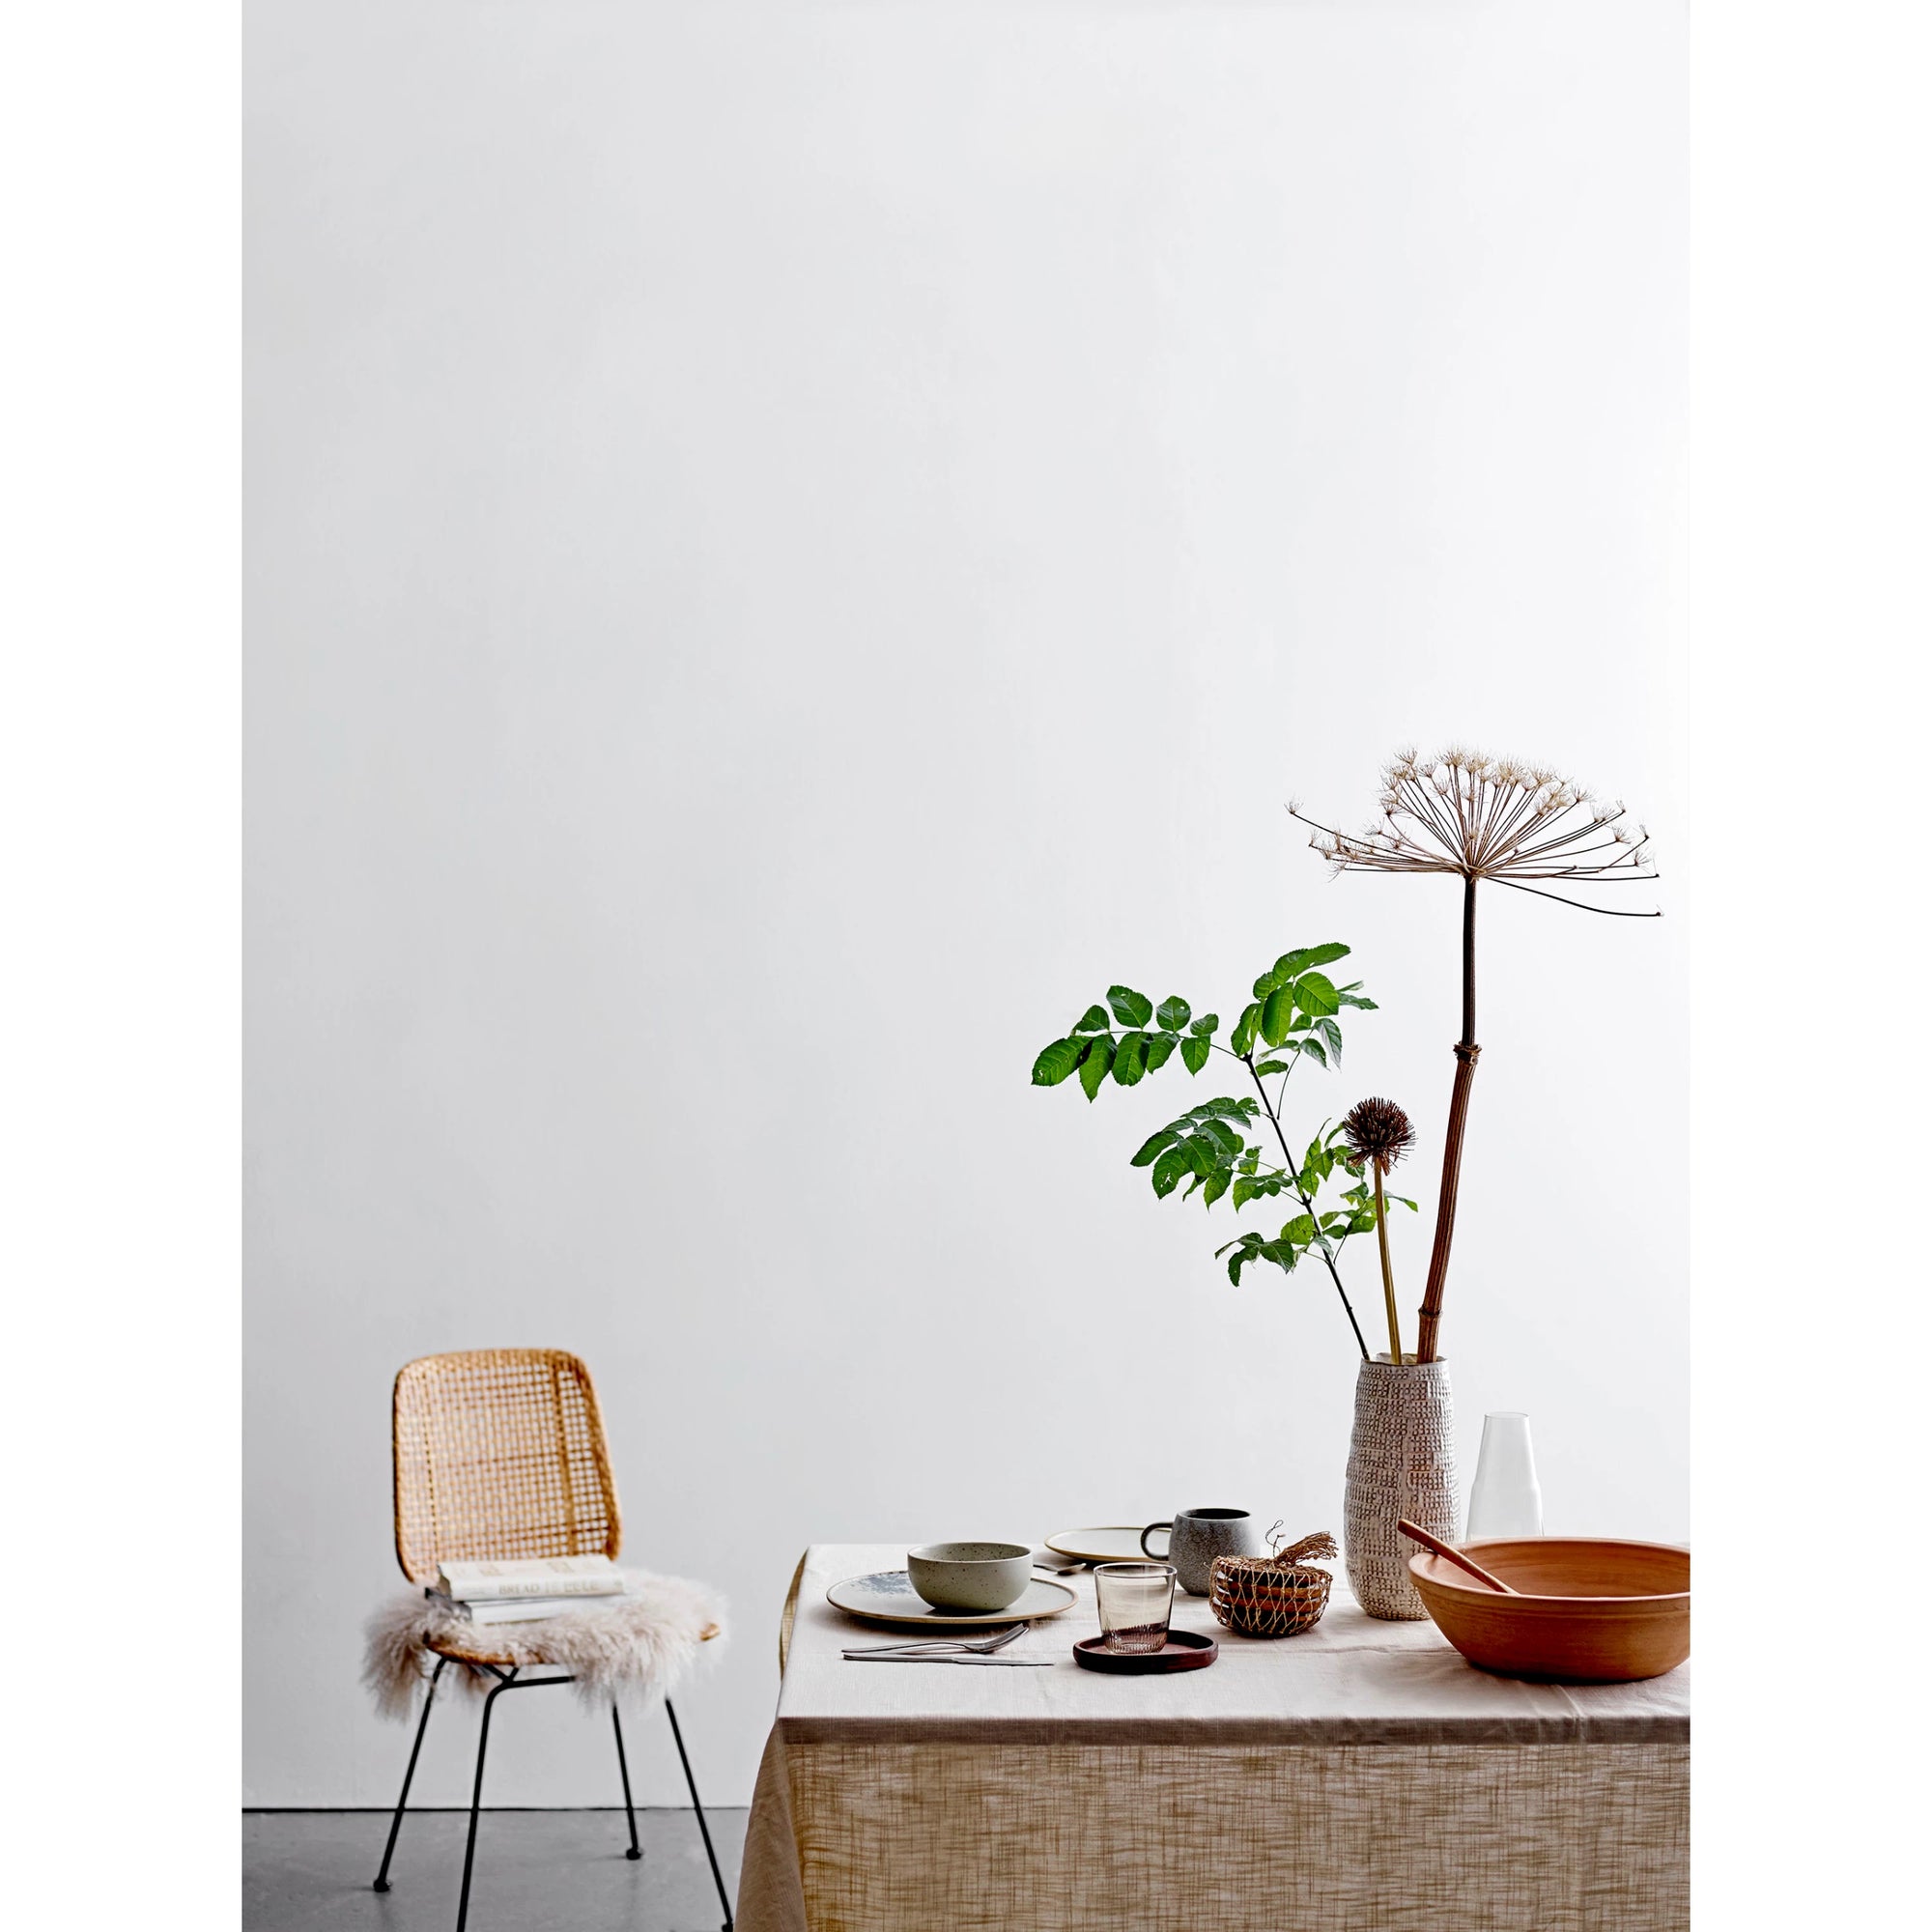 A minimalist dining scene in a Scottsdale, Arizona bungalow, featuring a wooden table covered by a beige tablecloth, adorned with various bowls and a cup. A woven chair with a white fluffy throw sits beside it, next to a Bloomingville stoneware vase with tall dried flowers.